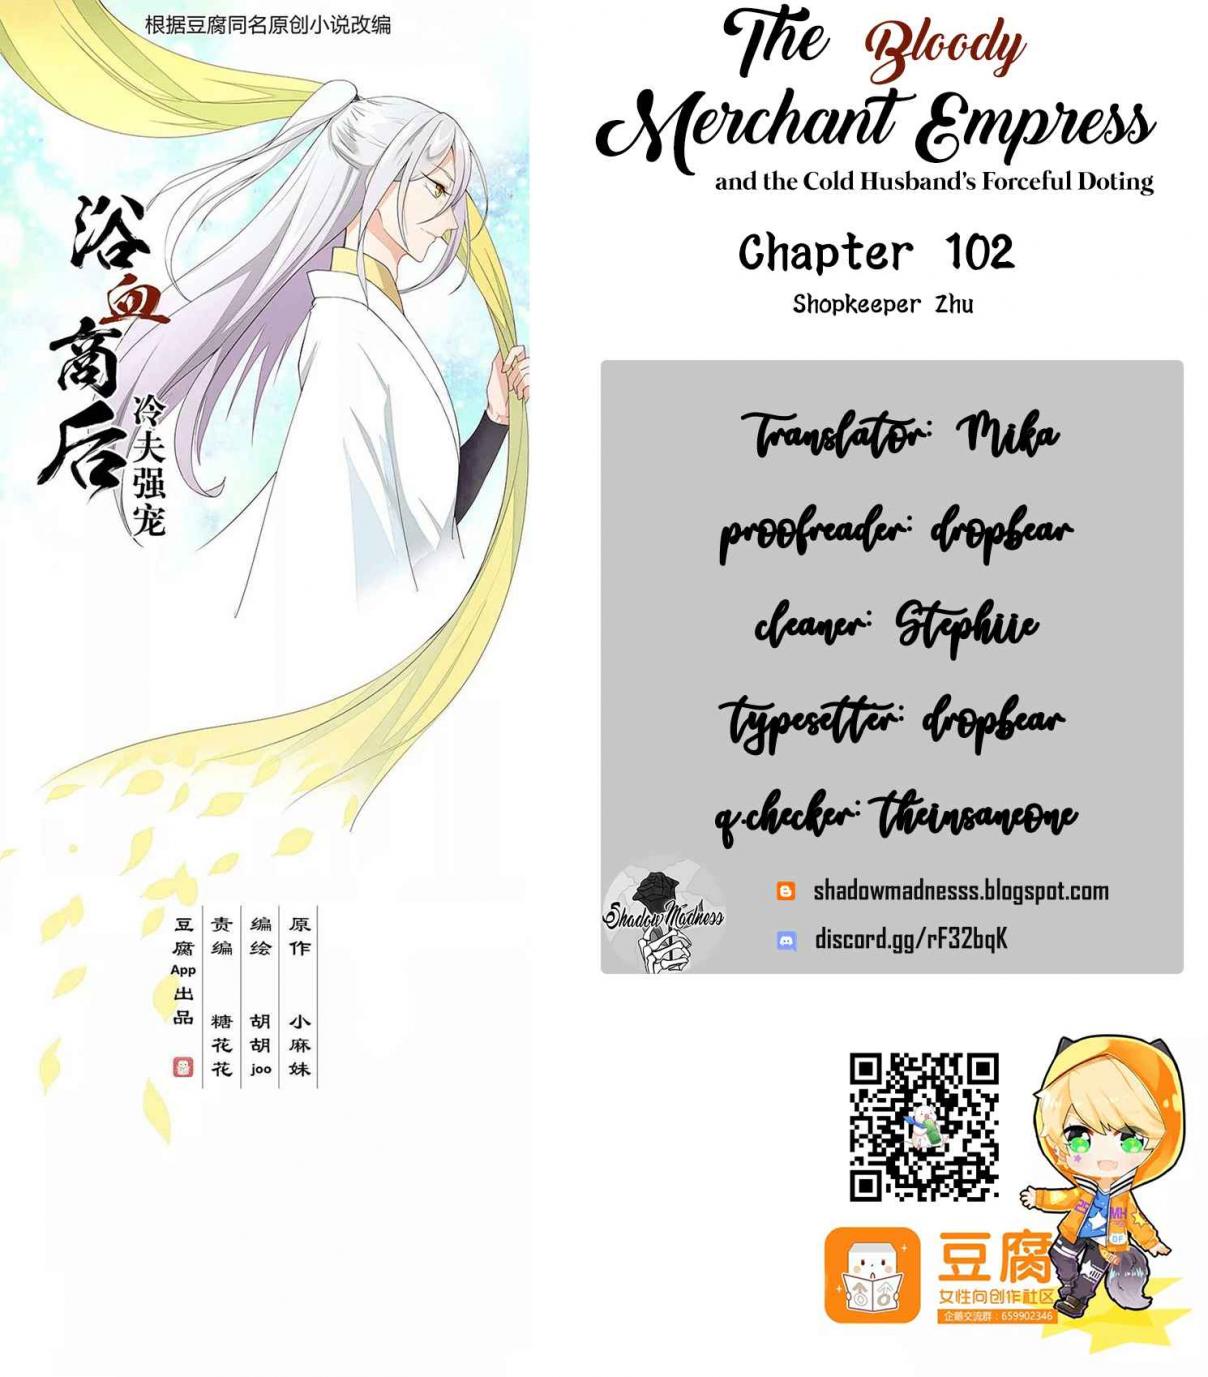 The Bloody Merchant Empress and the Cold Husband's Forceful Doting Ch. 102 Shopkeeper Zhu